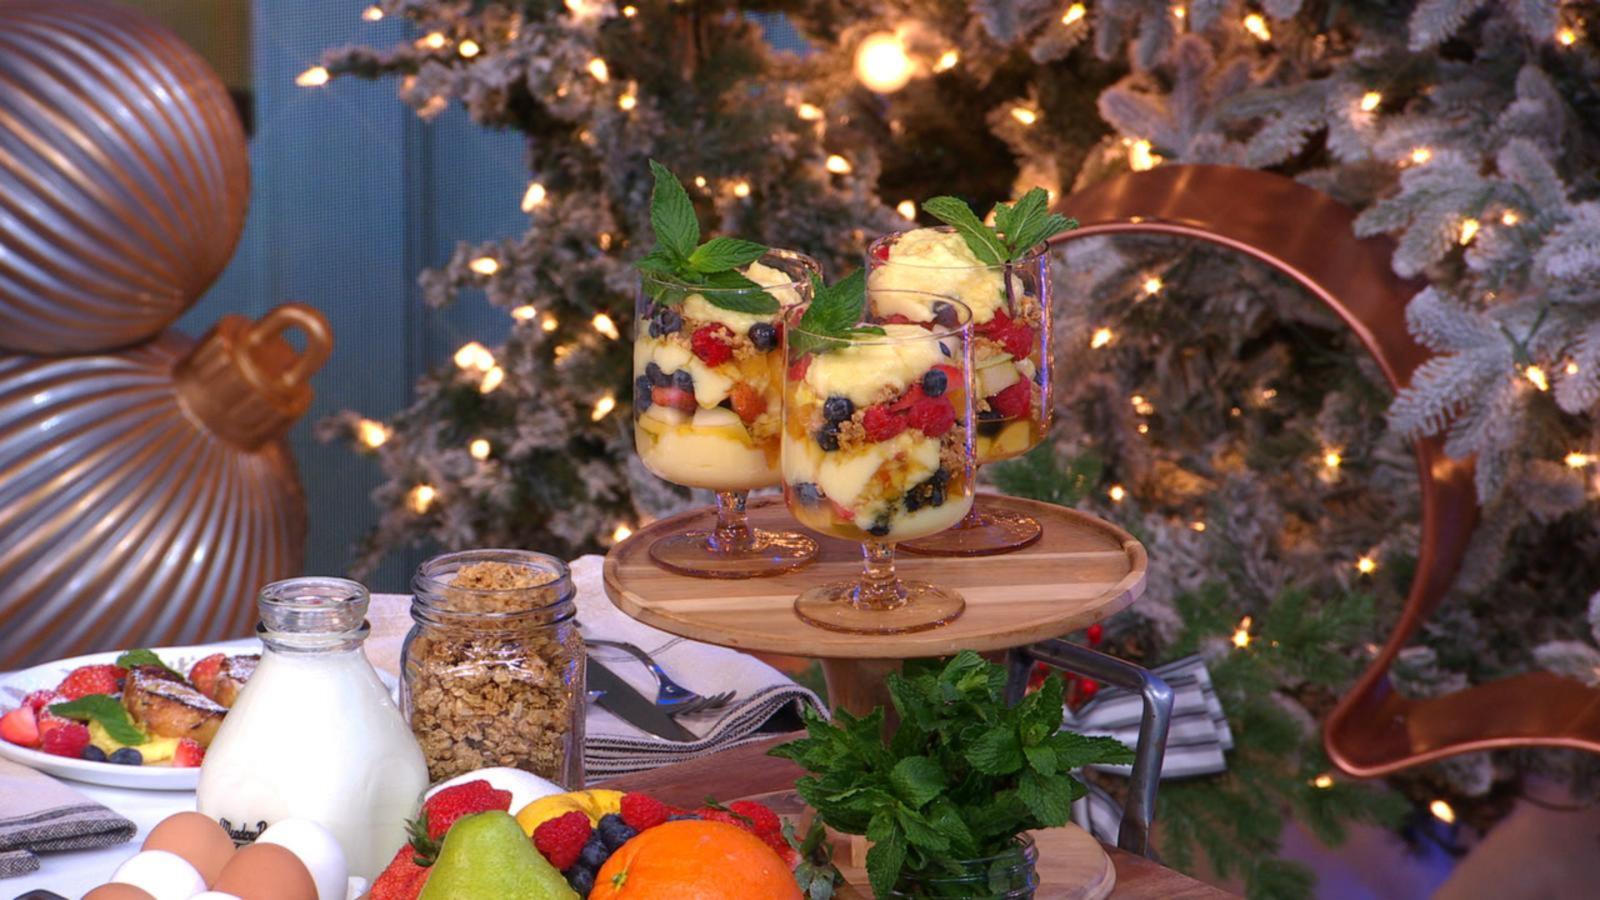 VIDEO: Ashish Alfred shares breakfast recipes made of Christmas leftovers